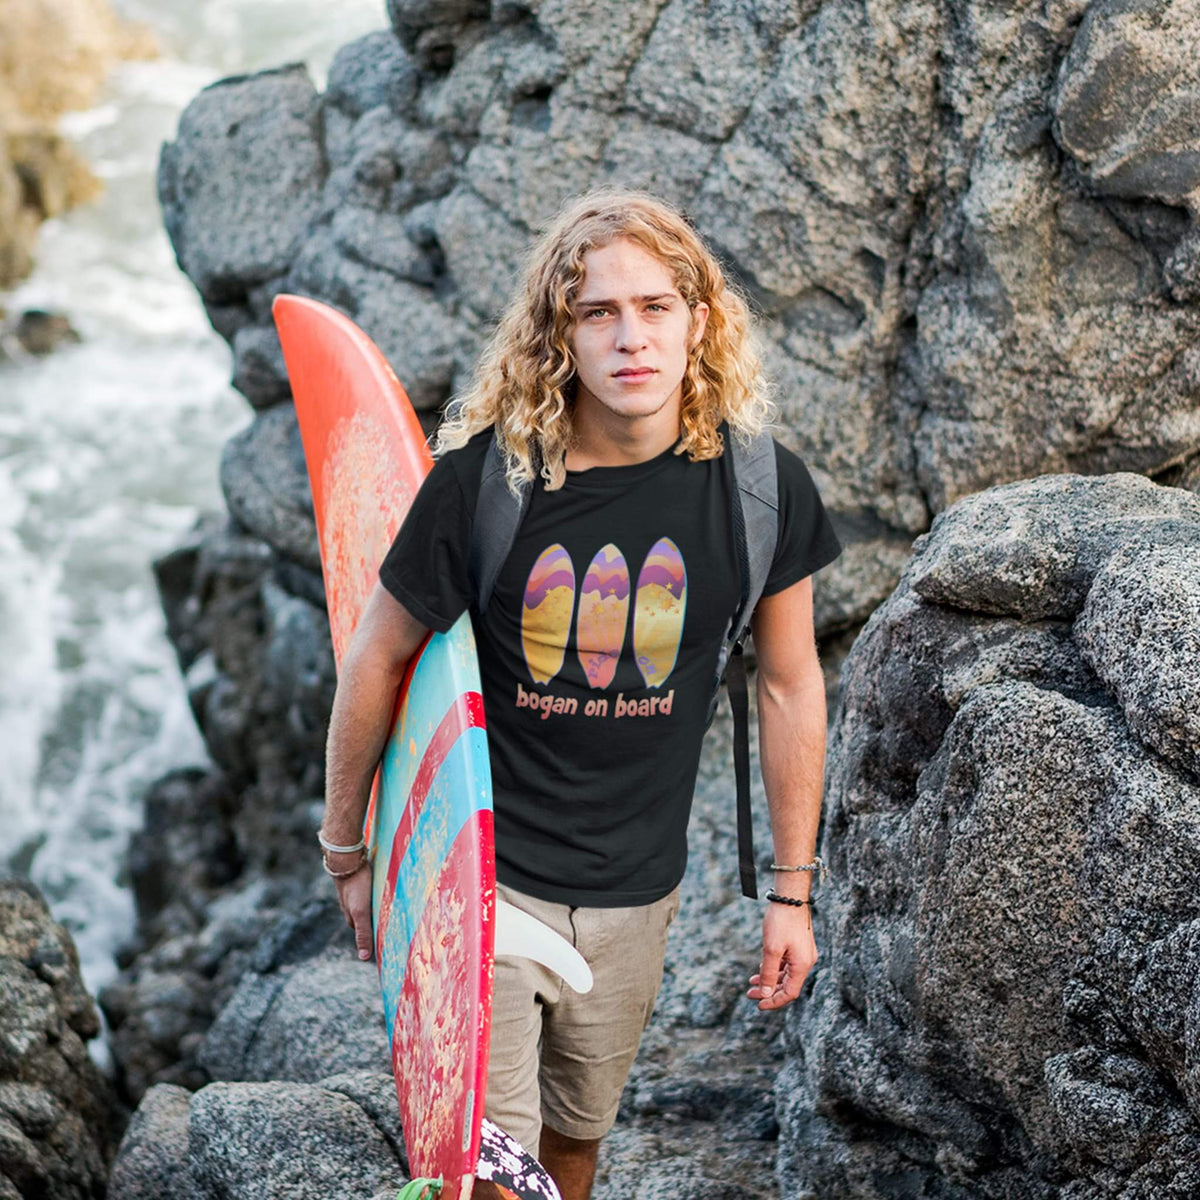 Surfer wearing black tee with Bogan on Board graphic surf design